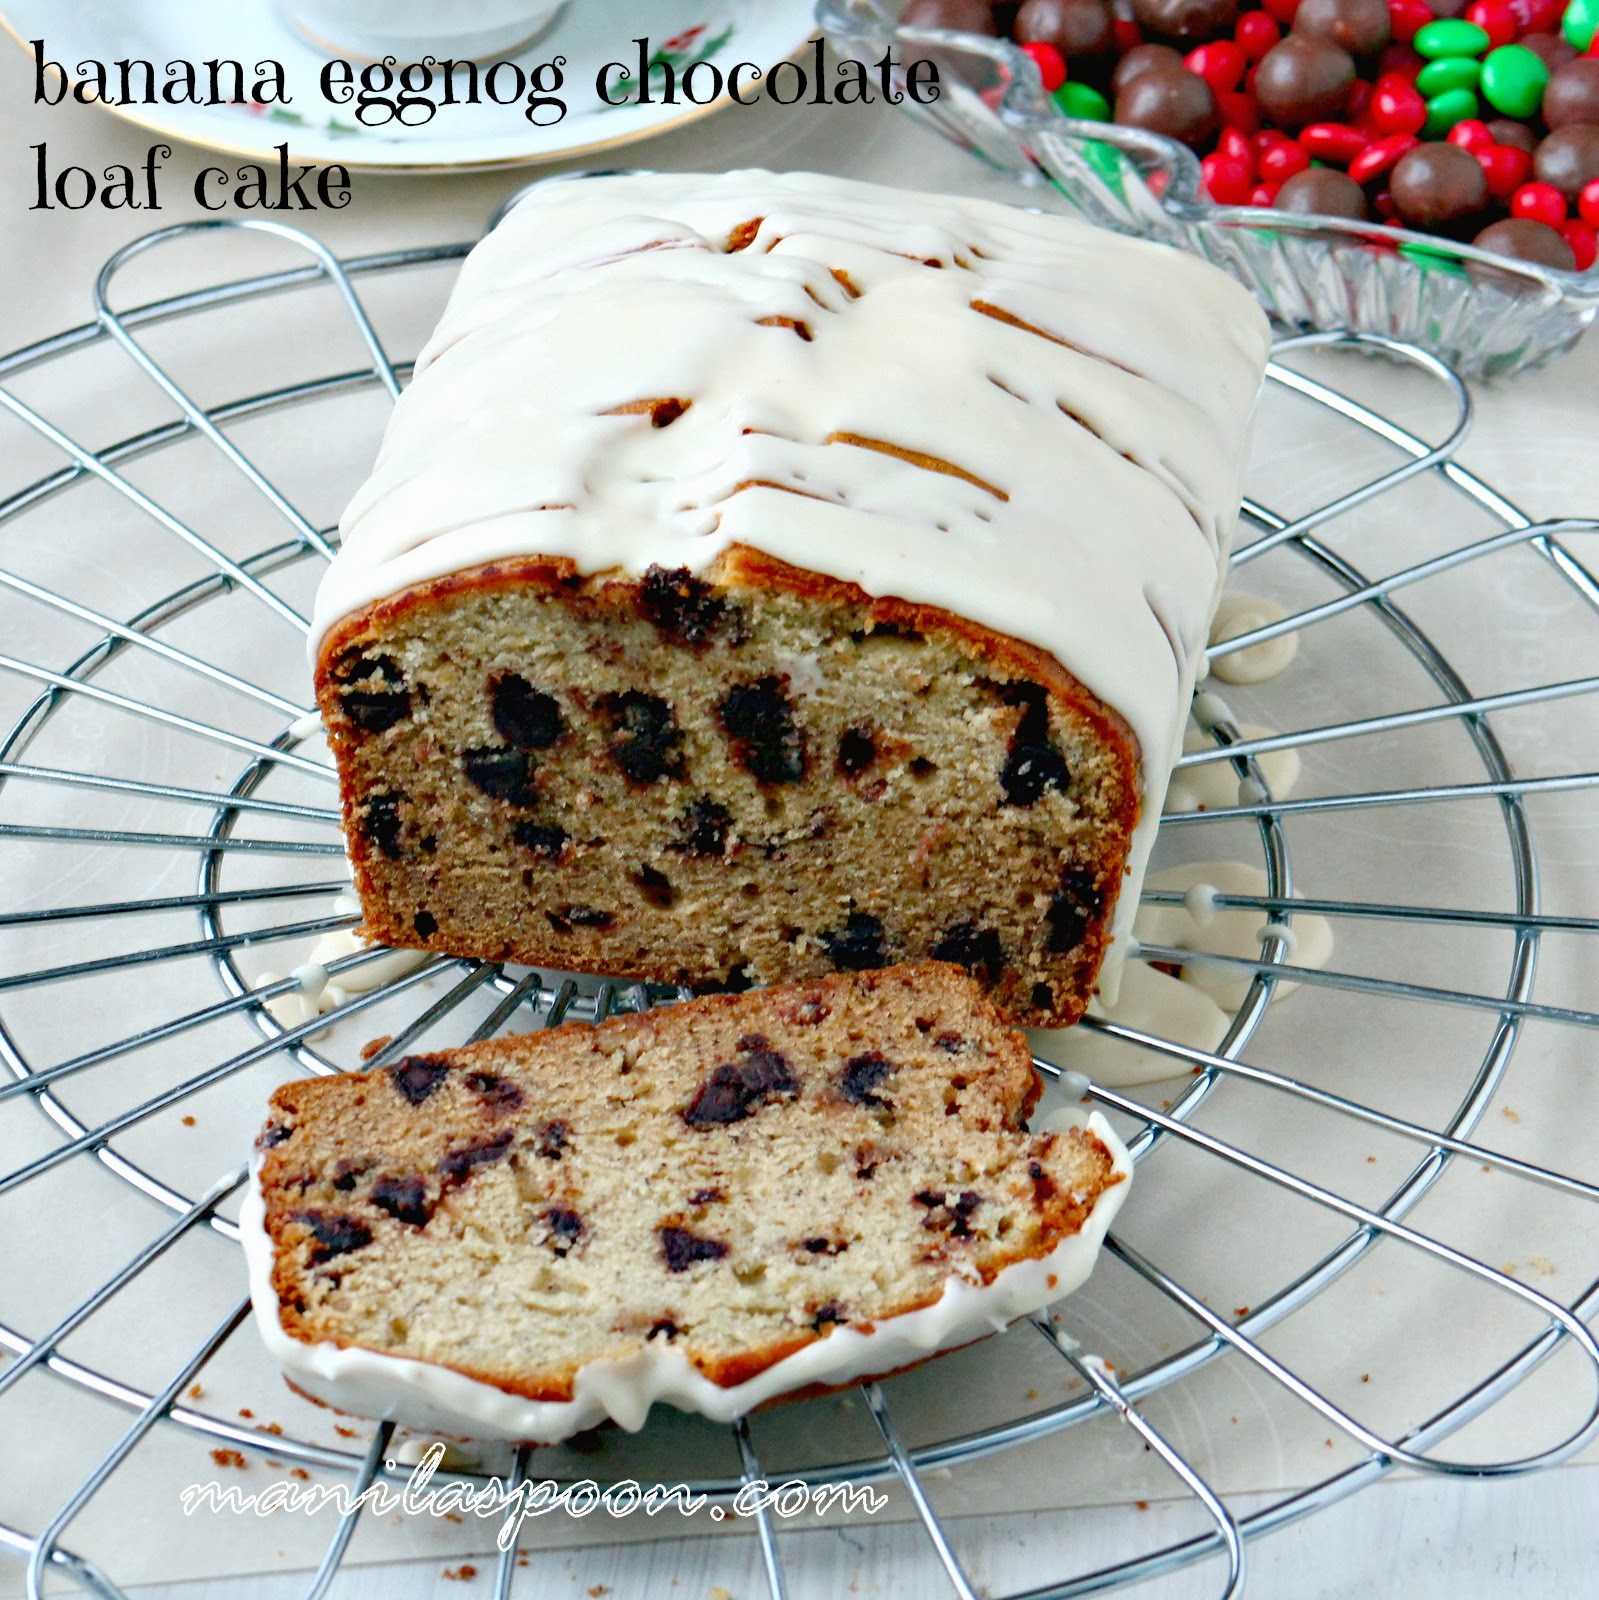 A delicious loaf cake with banana, chocolate and eggnog flavors. Perfect for snacking or with a cup of coffee or tea. Great for Christmas and New Year celebrations! | manilaspoon.com